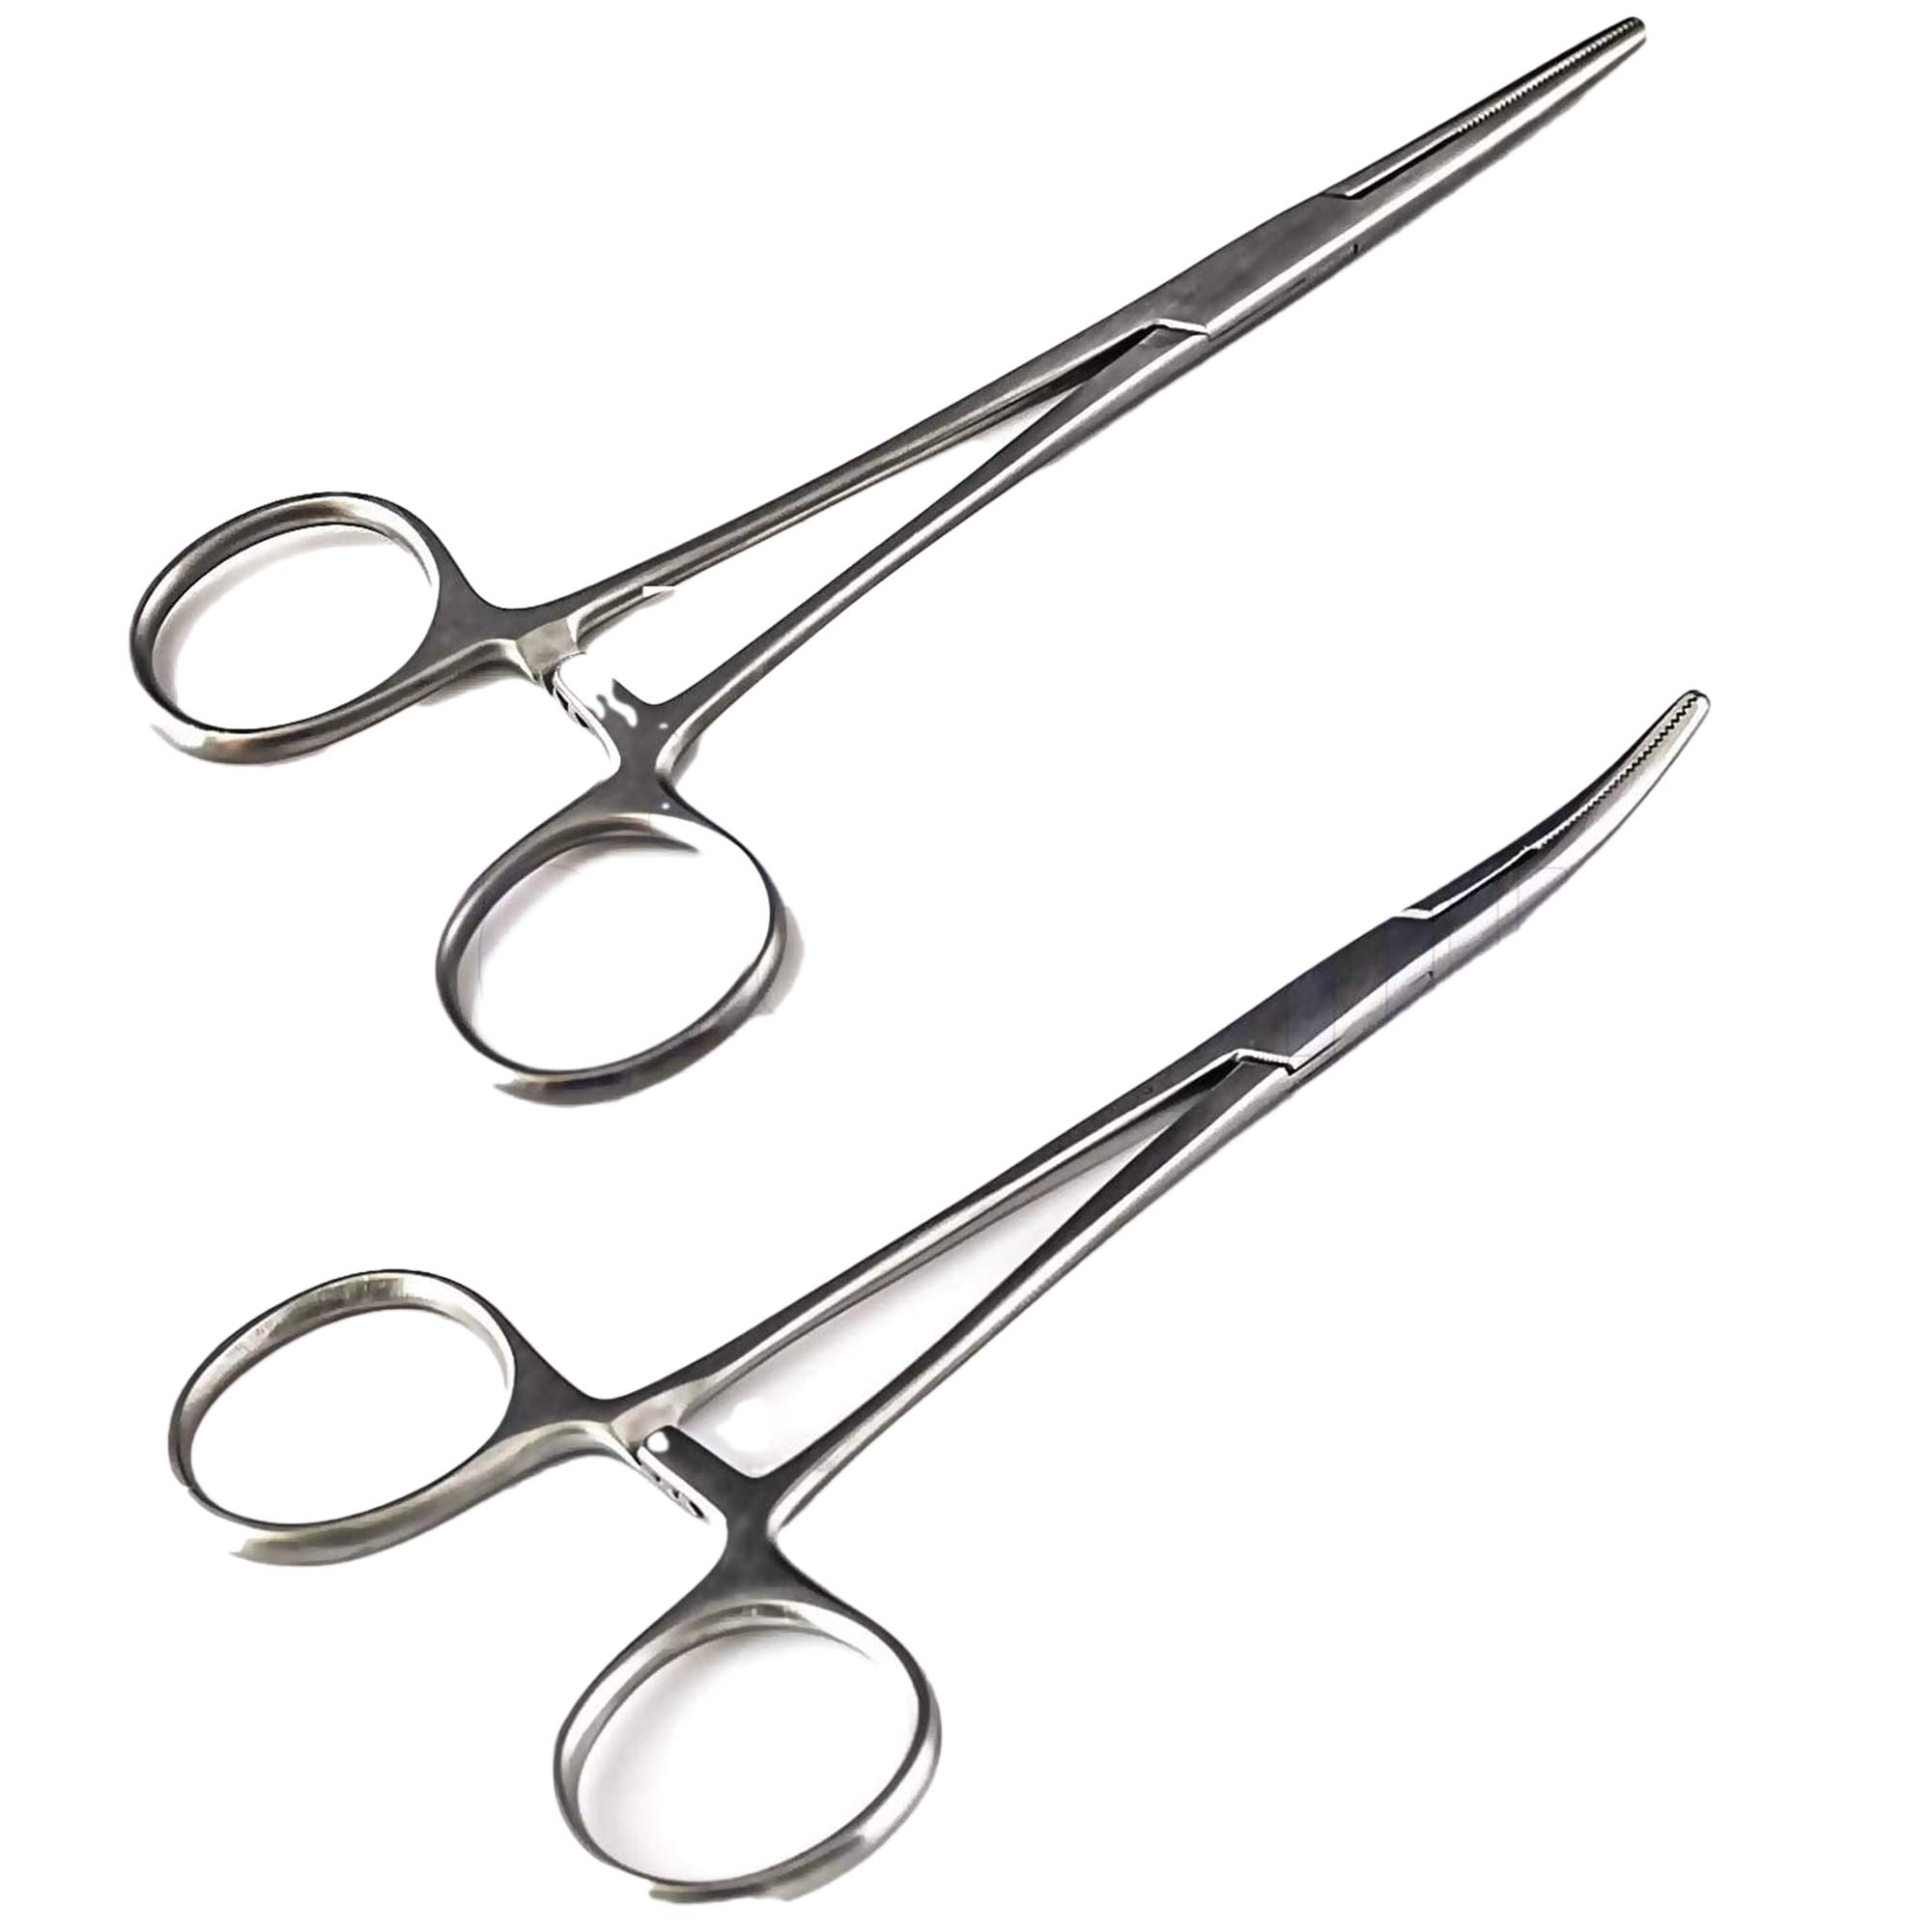 Pair of Fishing Forceps, Straight and Curved, Stainless Steel